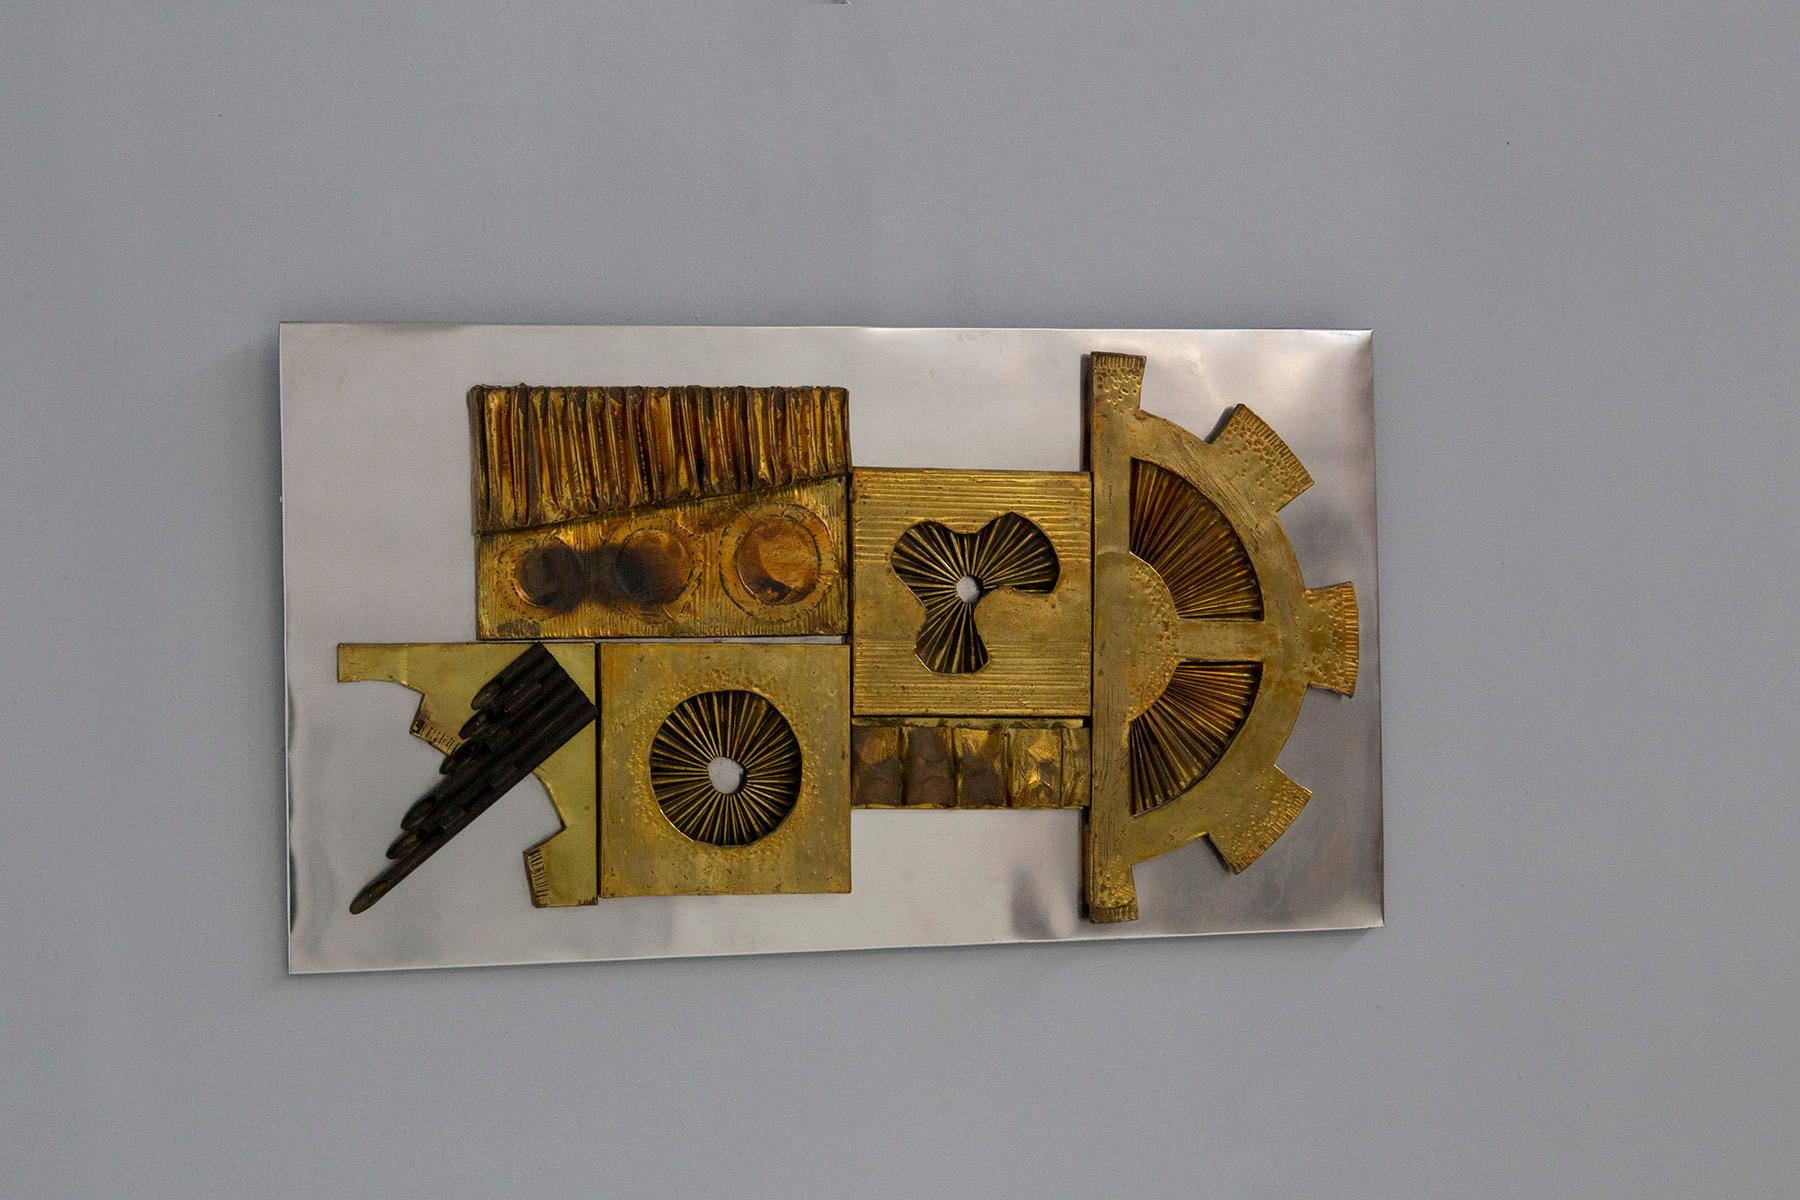 Decorative wall sculpture from the 1970s. The 'work is by artist and creator Stephen Chun. The work is mounted from a metal panel where his artwork is later applied. The sculpture is made of different metals, such as bronze, brass, and copper, which